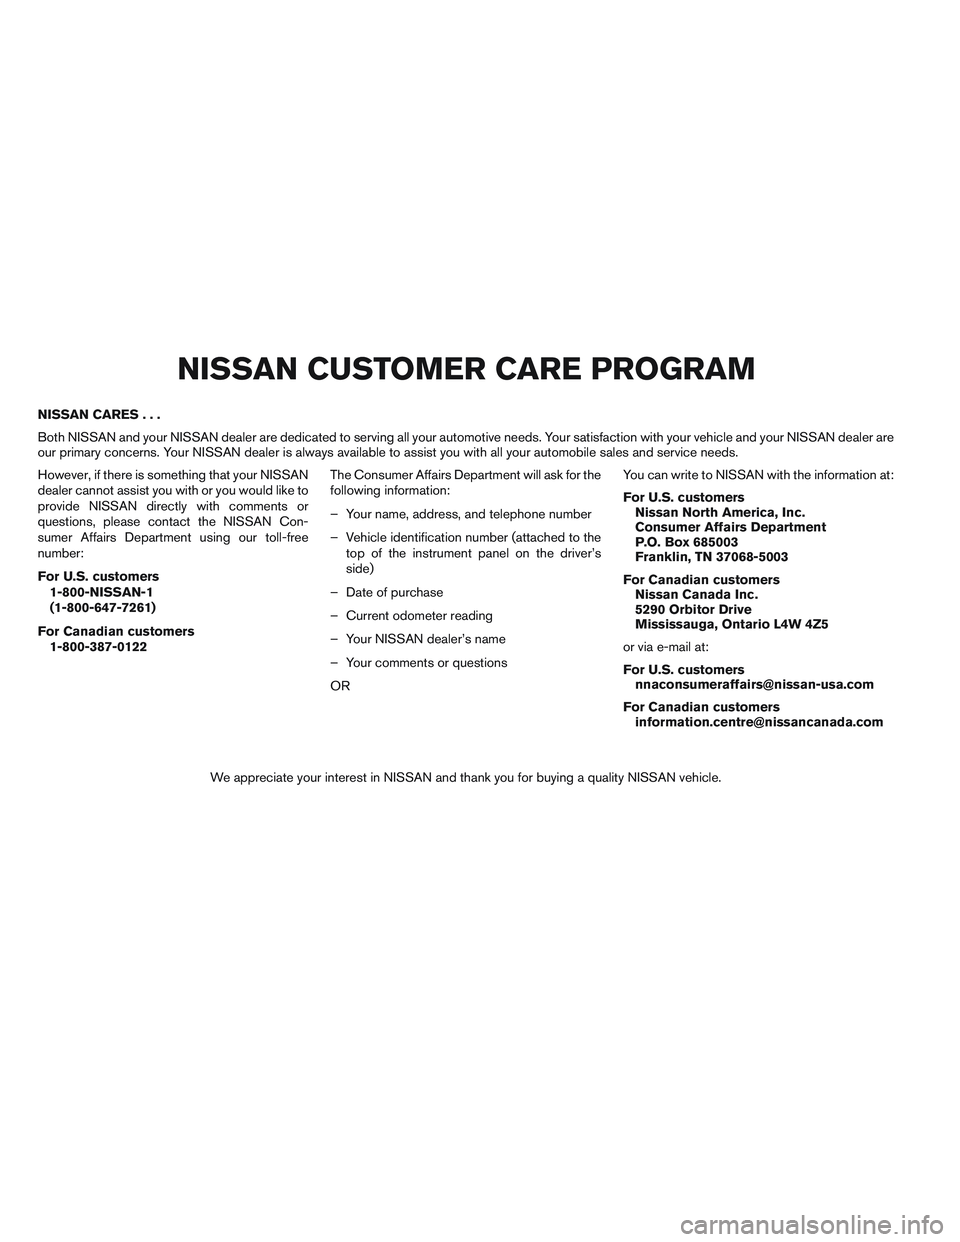 NISSAN FRONTIER 2012  Owner´s Manual NISSAN CARES...
Both NISSAN and your NISSAN dealer are dedicated to serving all your automotive needs. Your satisfaction with your vehicle and your NISSAN dealer are
our primary concerns. Your NISSAN 